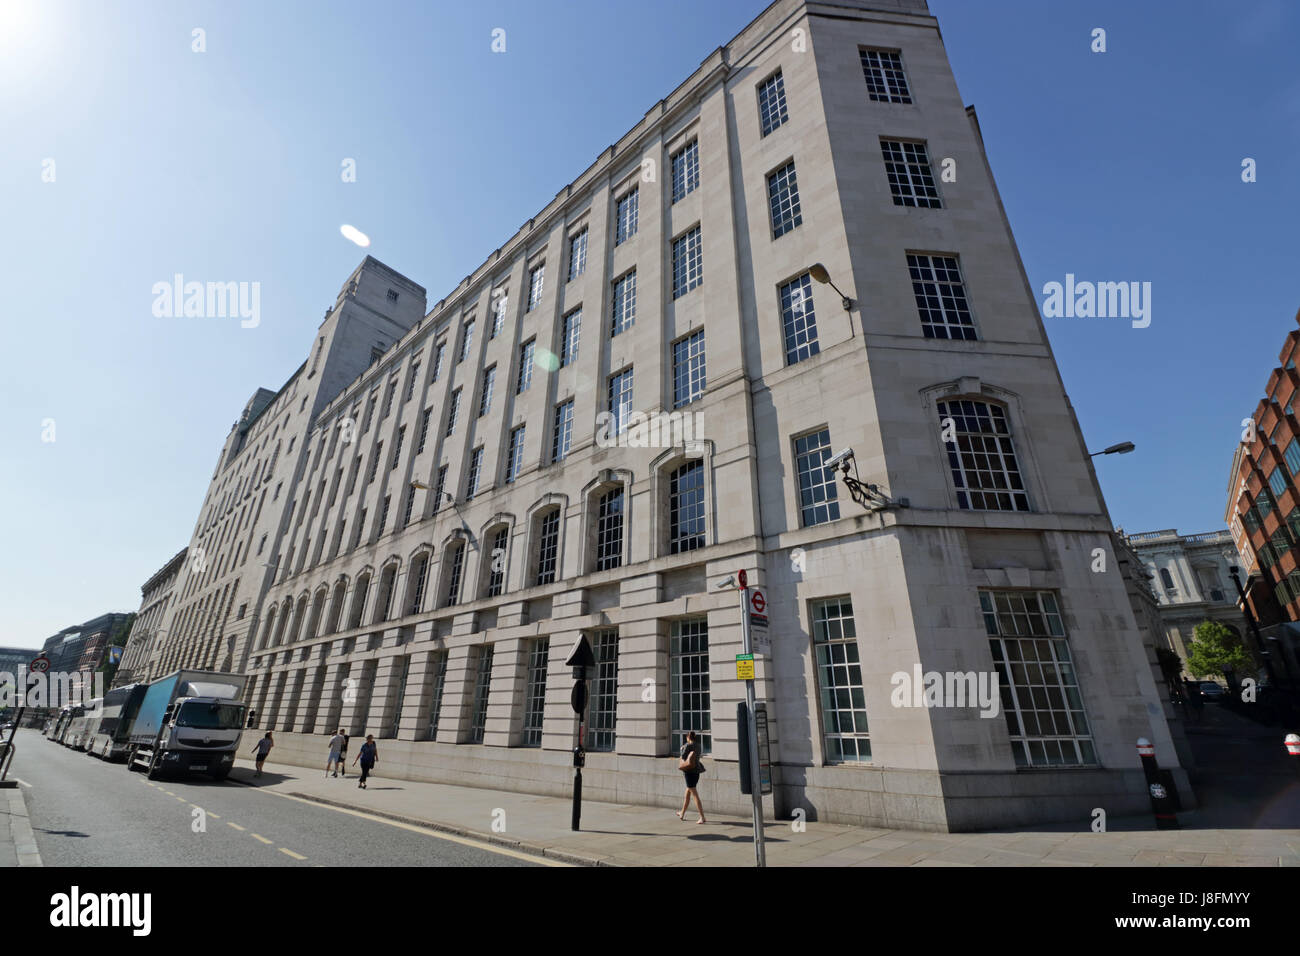 Faraday Building former GPO Telephone Exchange Queen Victoria St, London  EC4V 4BY Stock Photo - Alamy